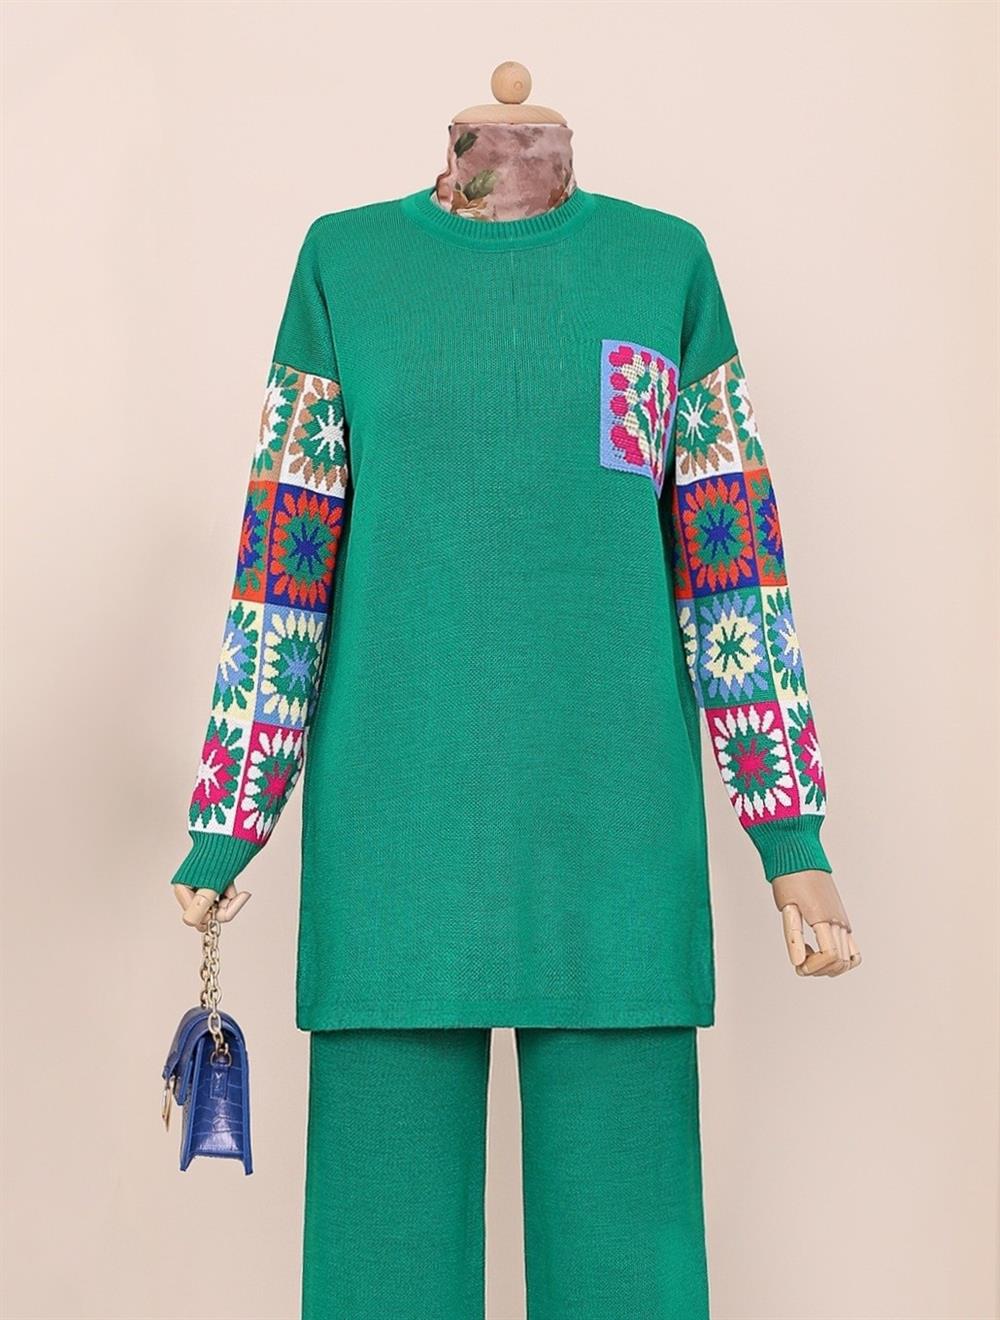 arm and Its Patterned Traditional Winter Knitwear Suit -Green